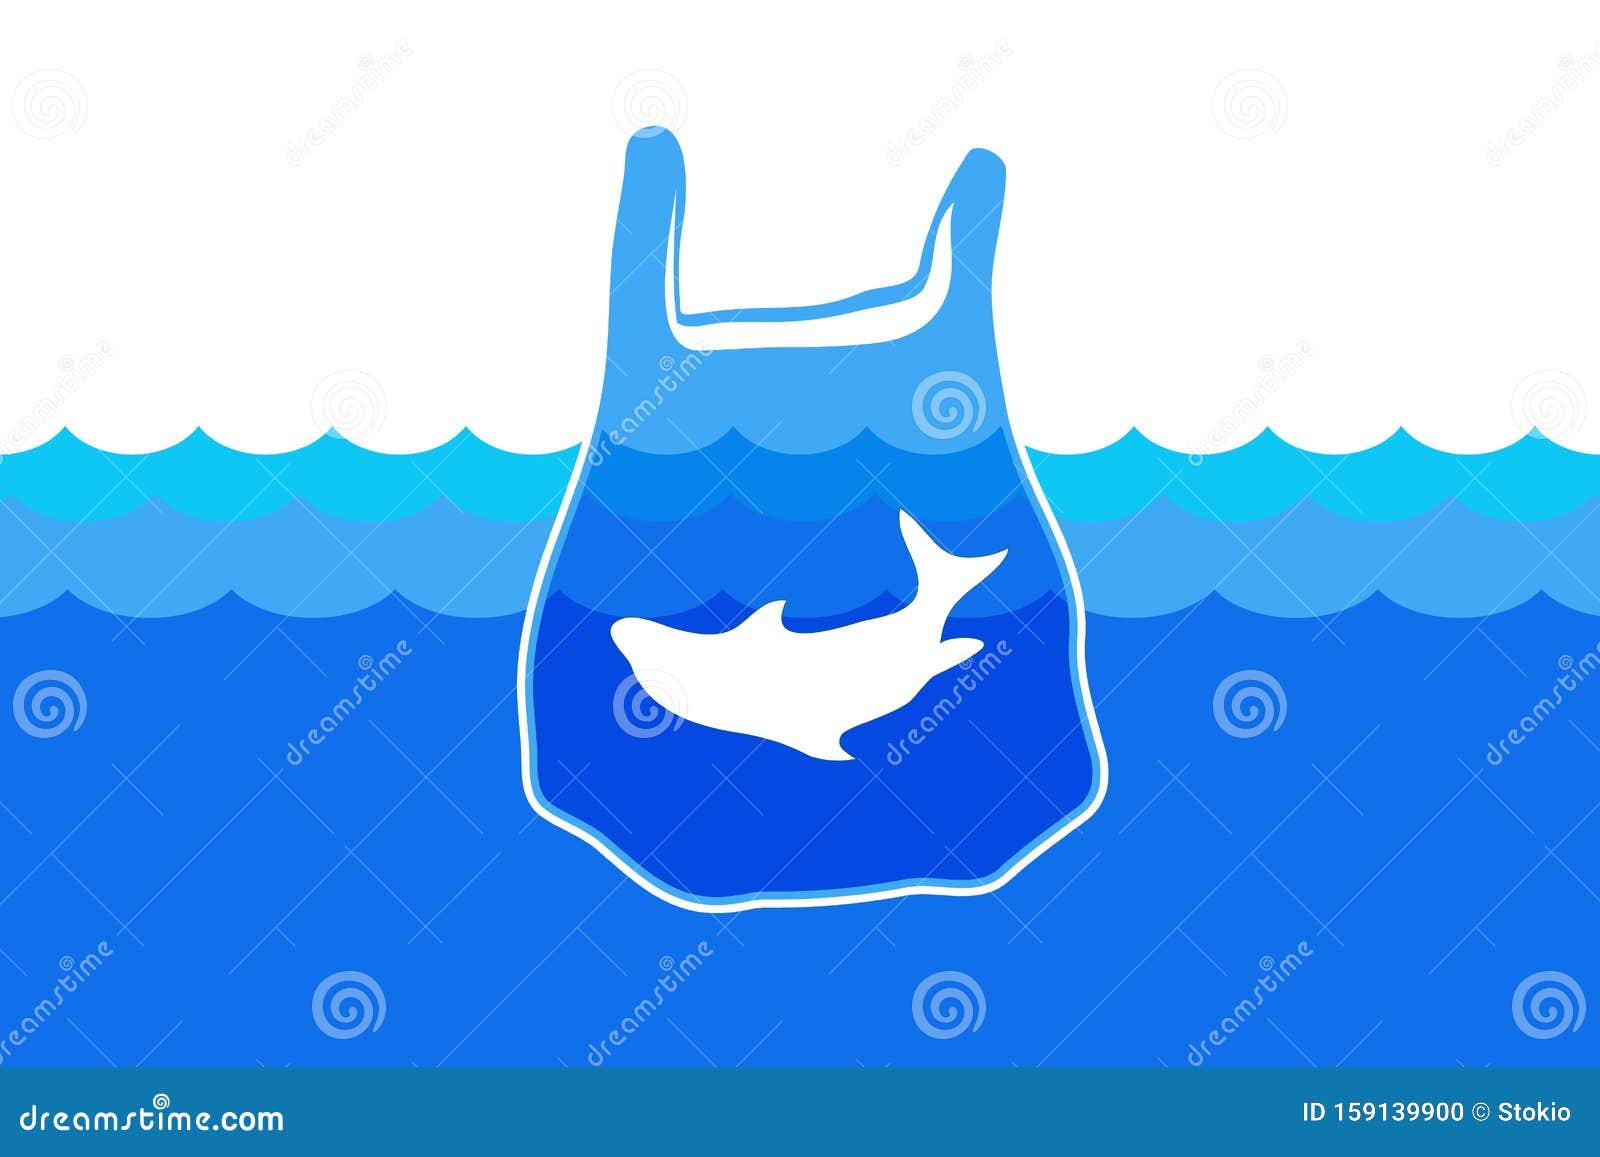 Stop Plastic Pollution stock vector. Illustration of floating - 159139900